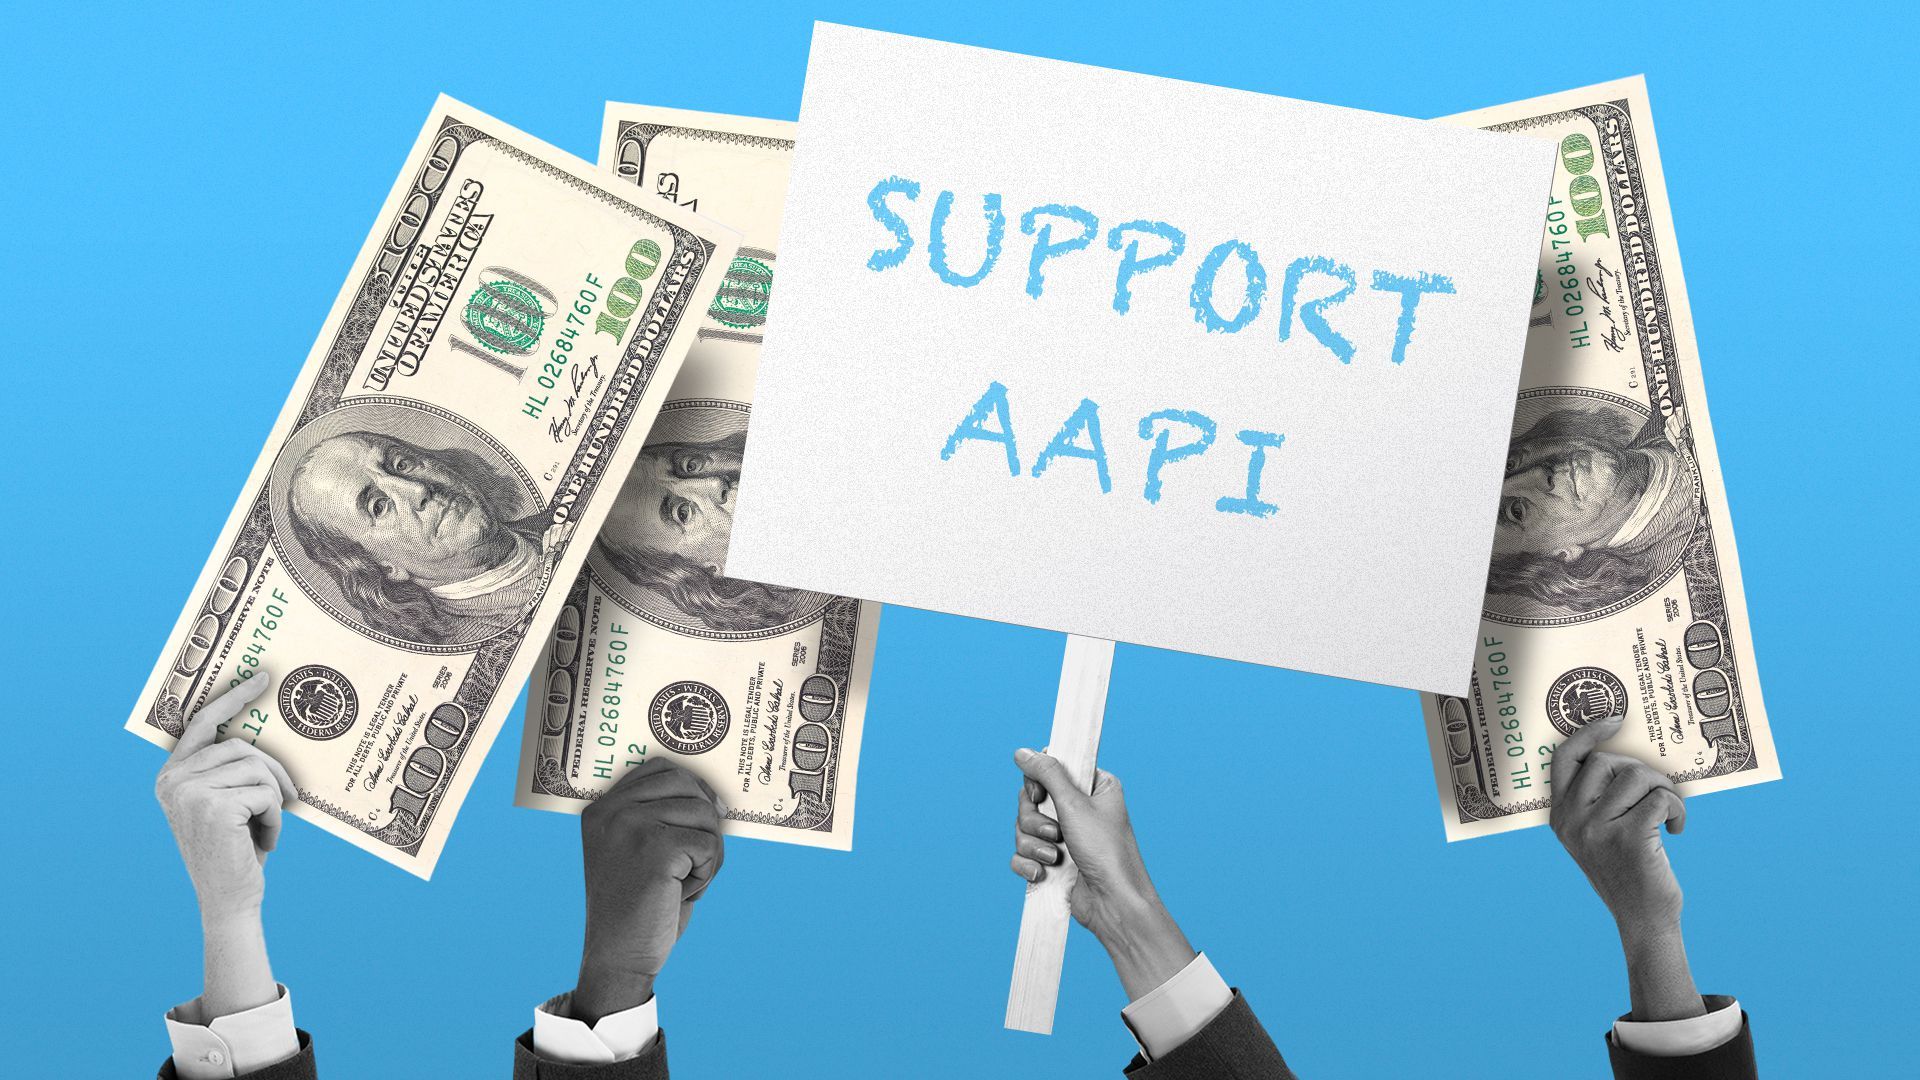 Illustration of hands holding up one hundred dollar bills and a protest sign in support of the AAPI community